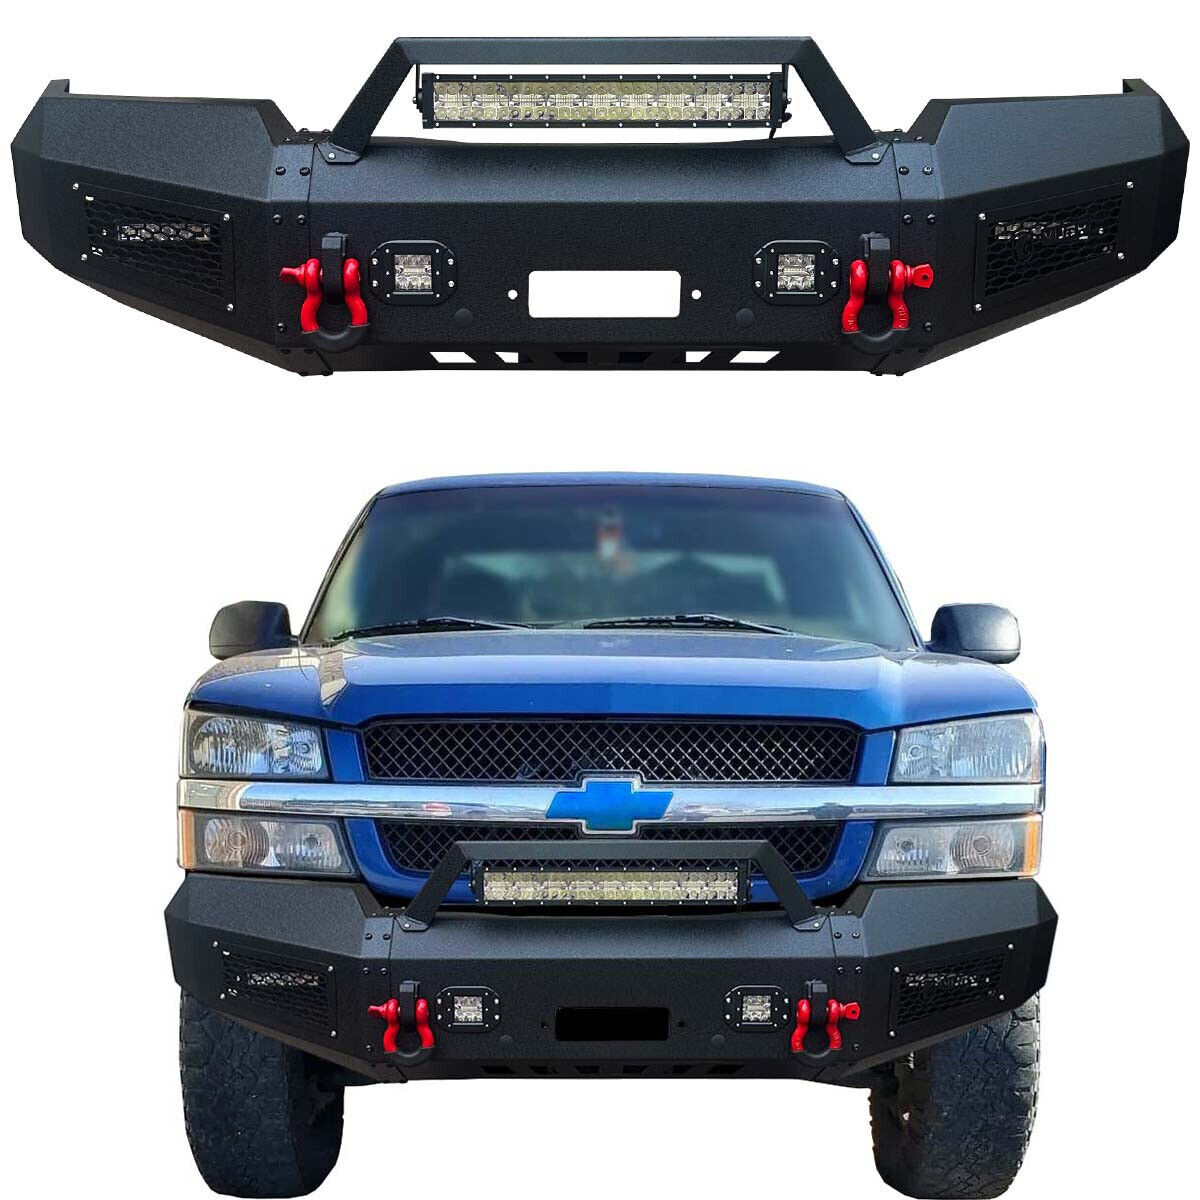 Fits 2003-2006 Chevy Silverado 1500  Front Bumper with Winch Plate and LED Light